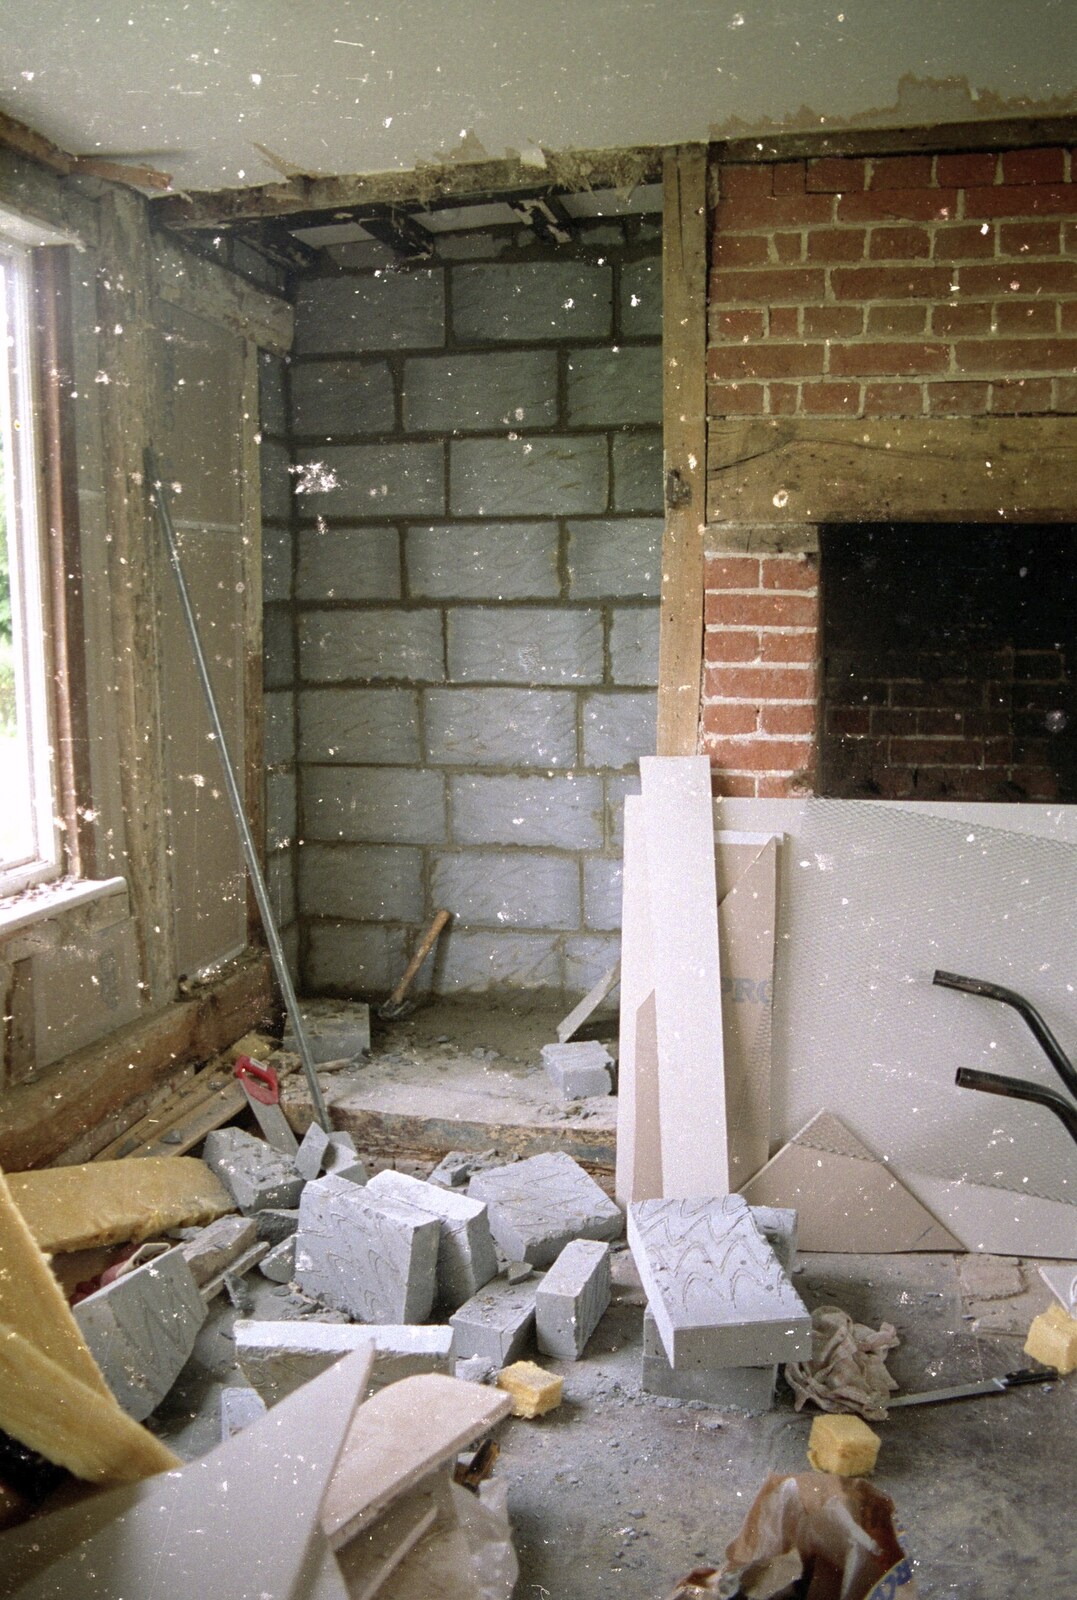 Meanwhile, downstairs, some re-building occurs from House Renovation Randomness and a Spot of Lightning, Brome, Suffolk - 19th June 1994